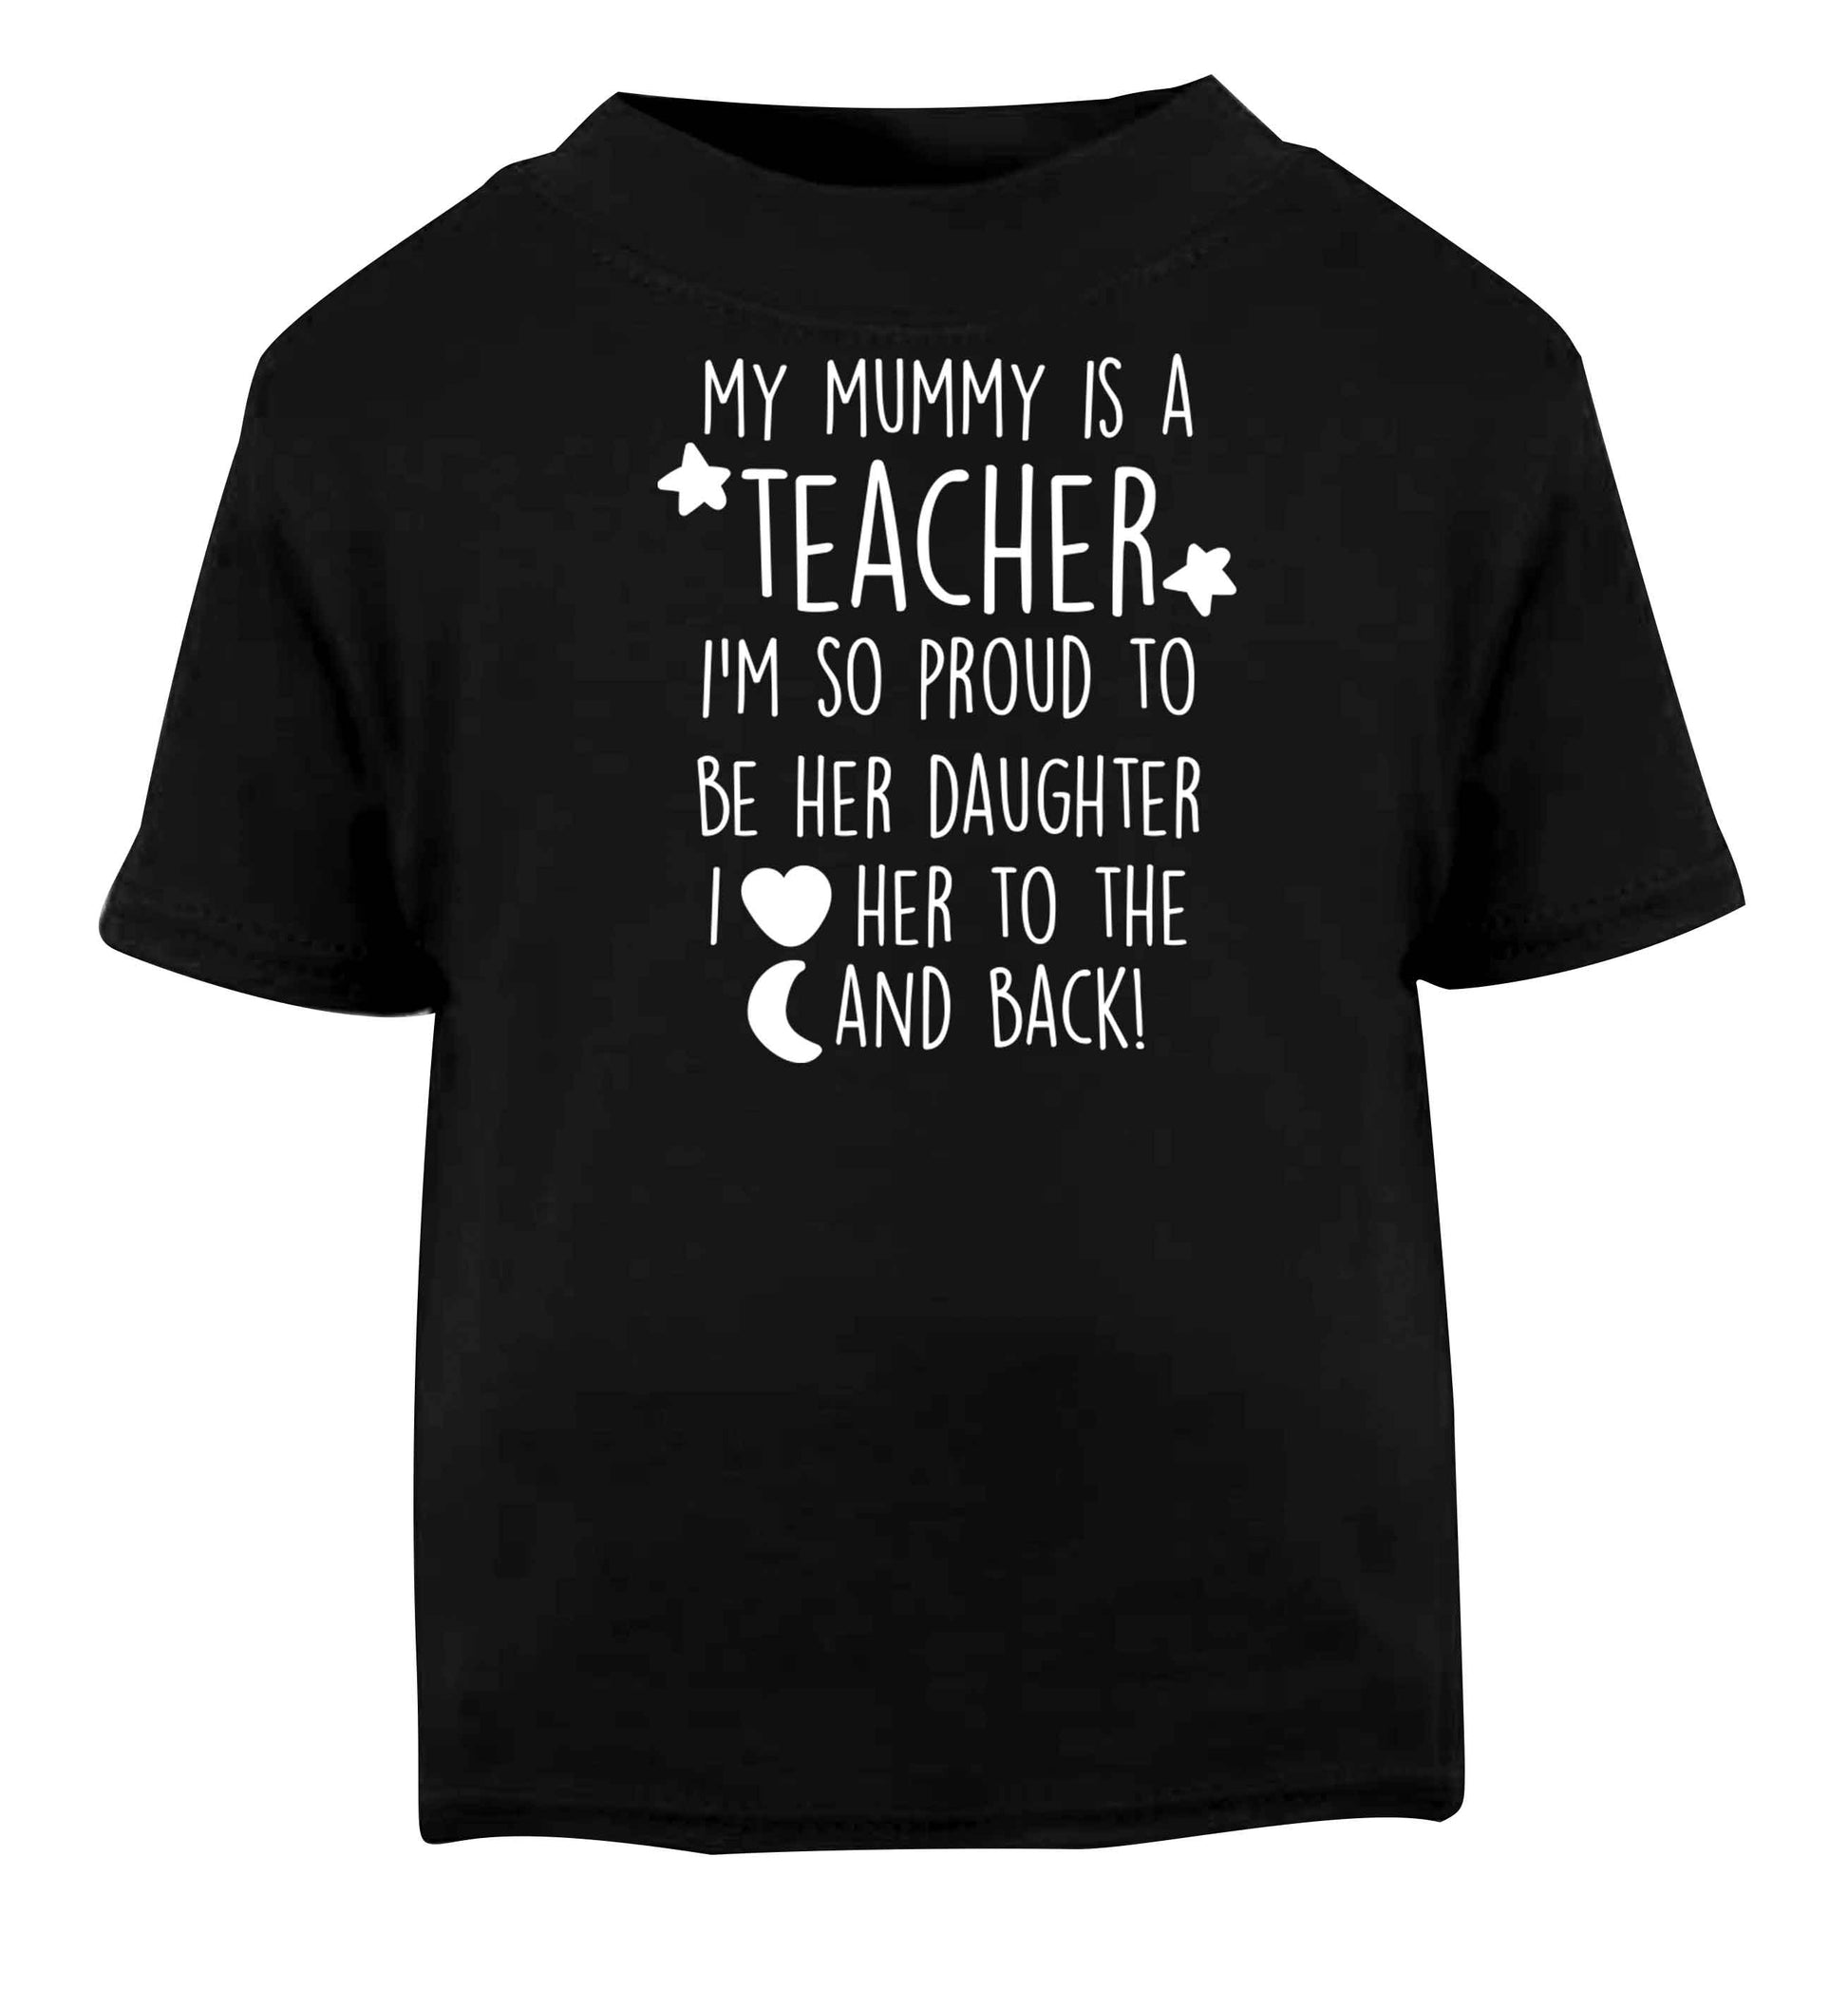 My mummy is a teacher I'm so proud to be her daughter I love her to the moon and back Black baby toddler Tshirt 2 years